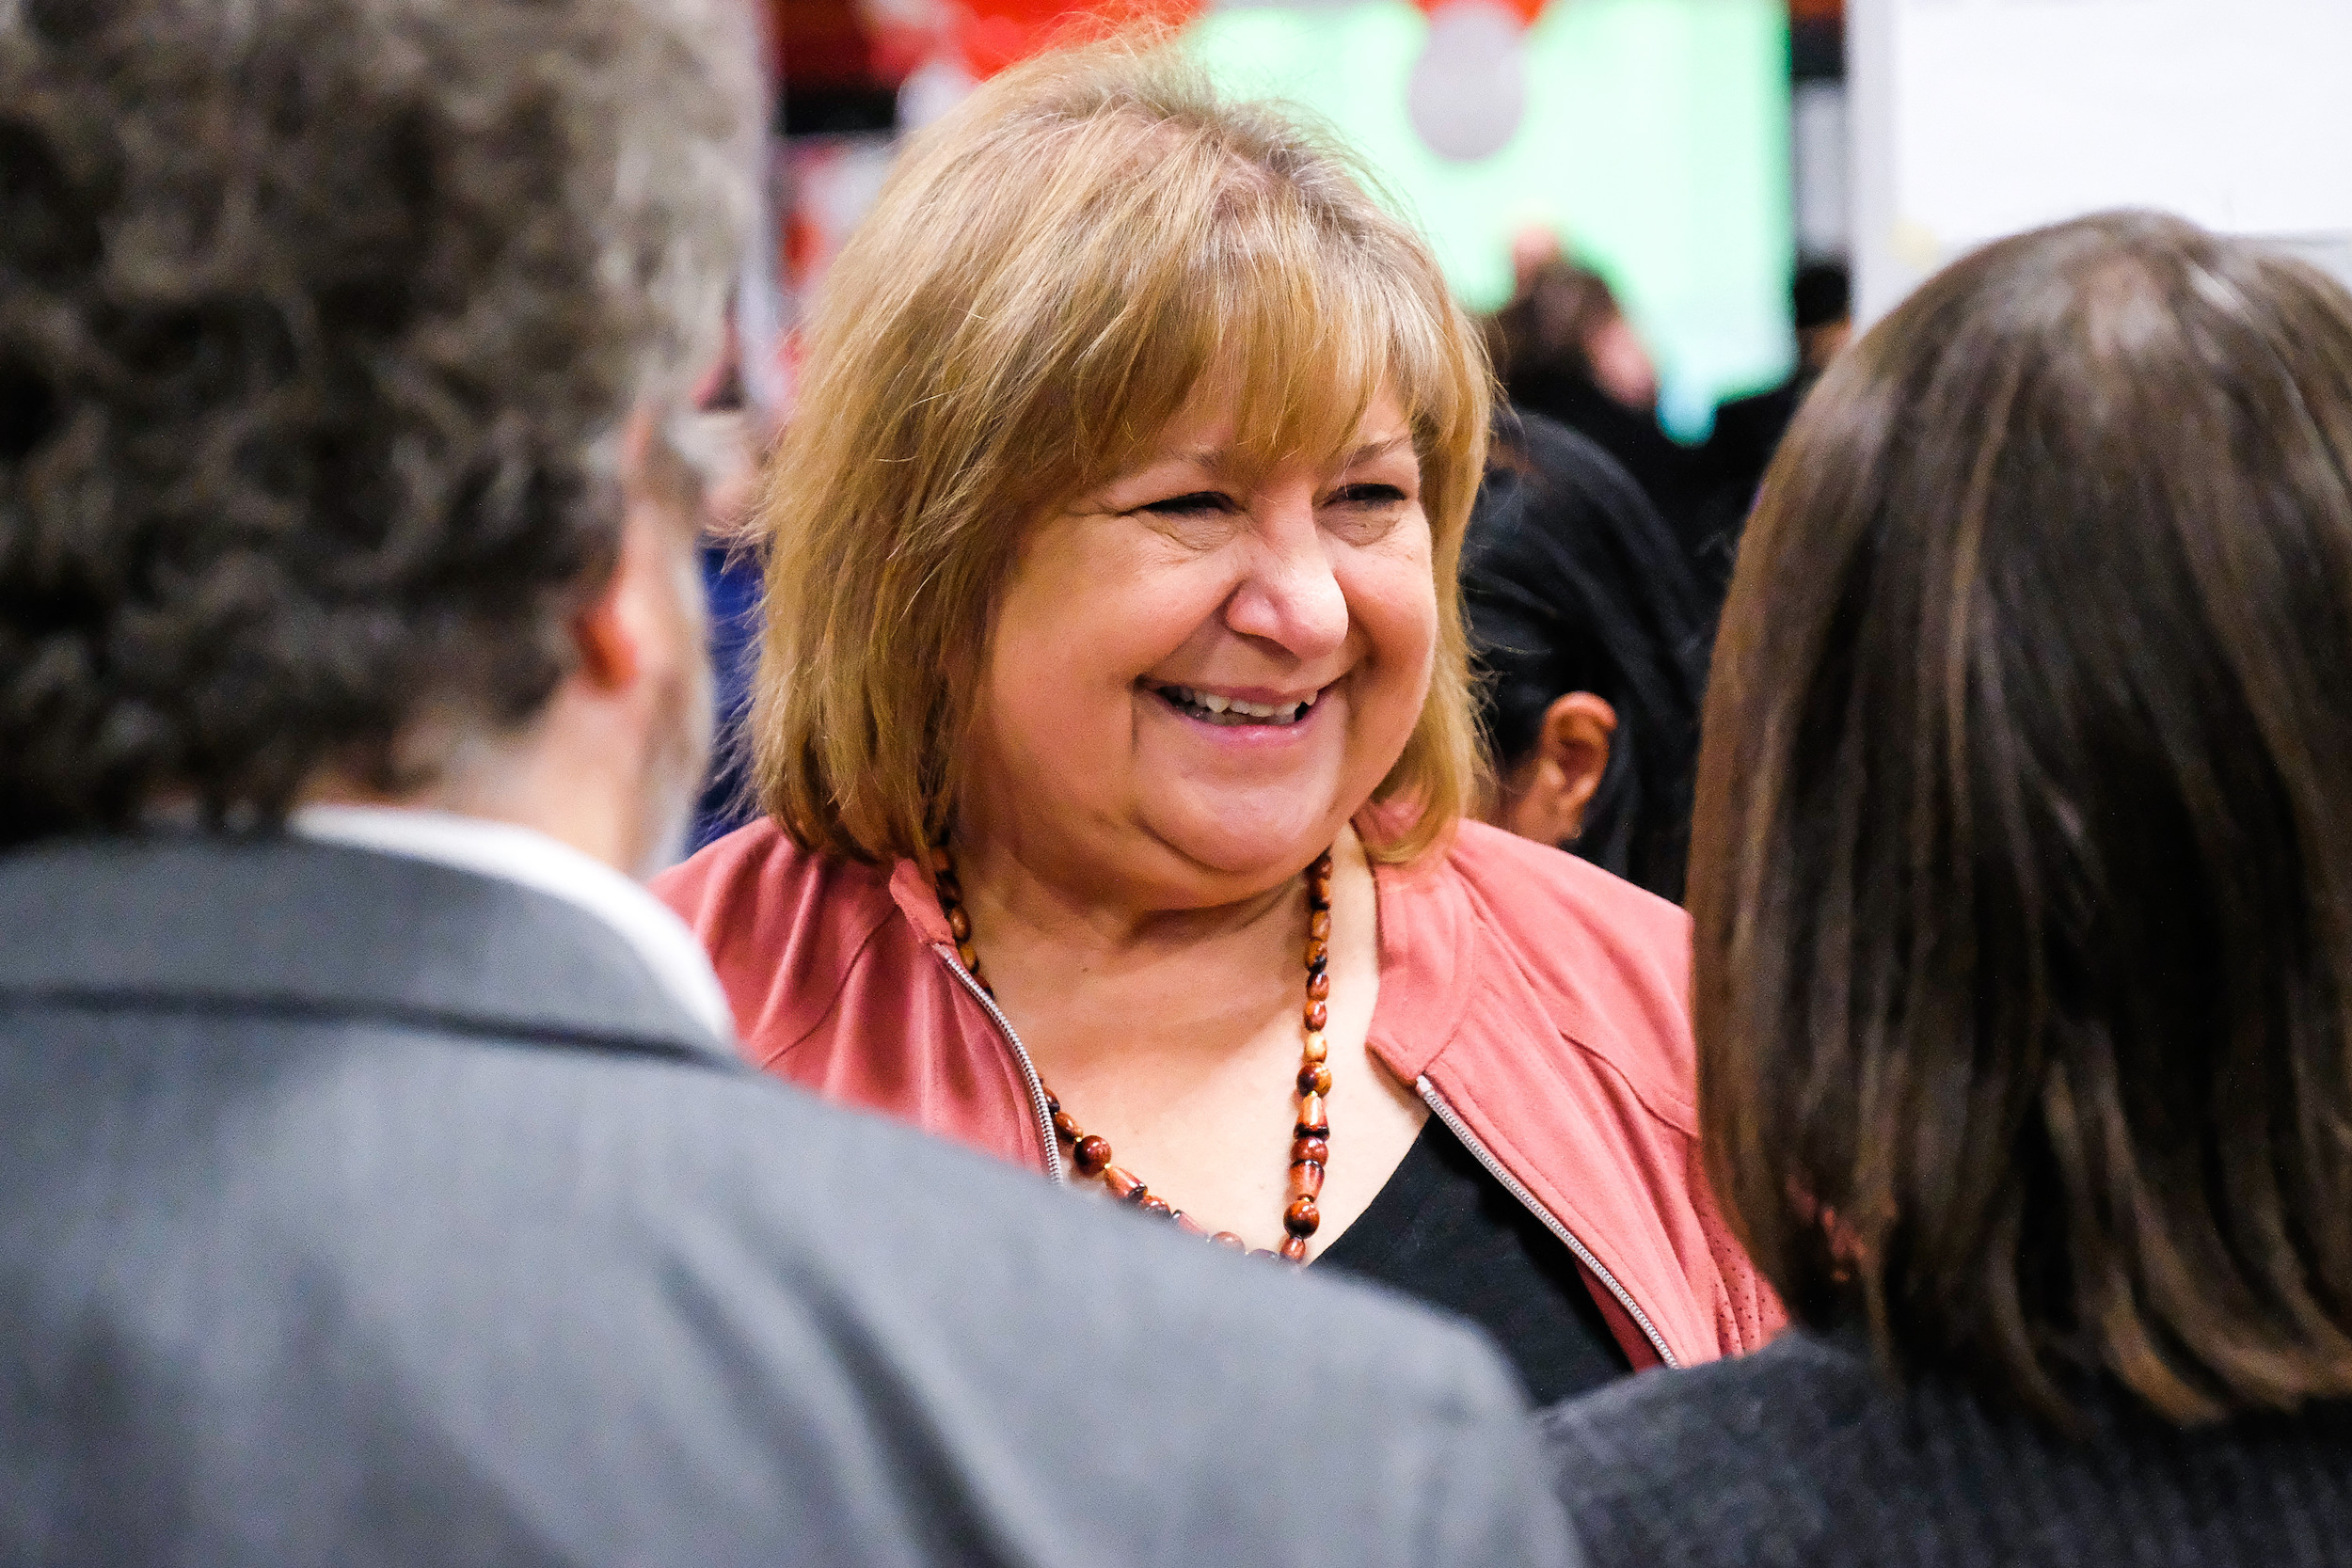 MaryAnn Mihychuk, wearing pink, speaks to two people at an event in 2019